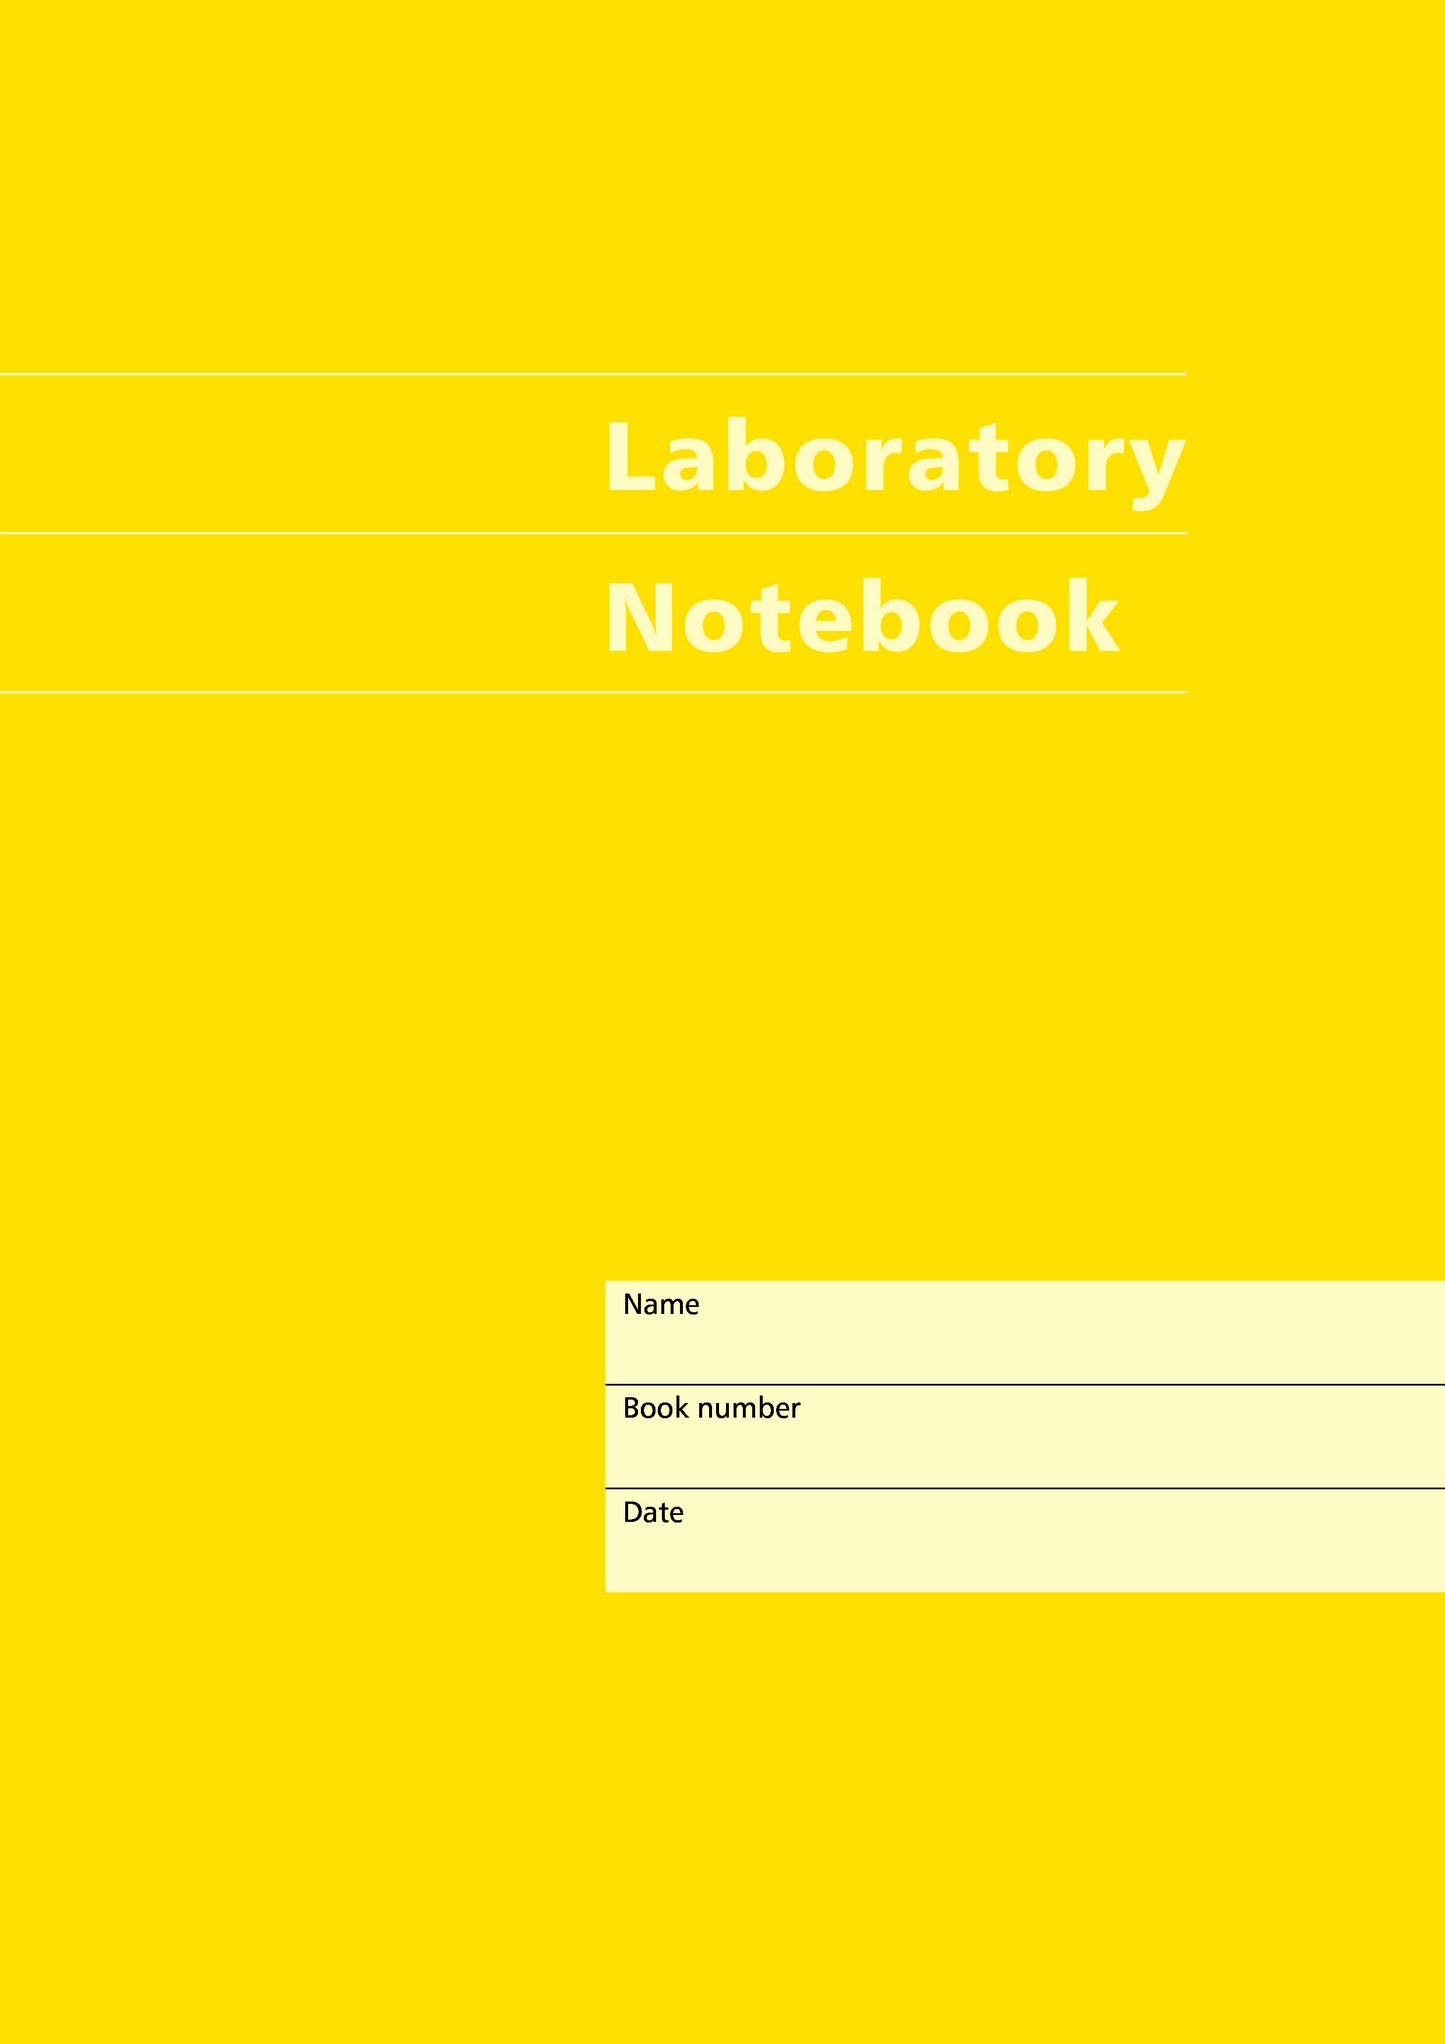 Code A01: A4 laboratory notebook - hardback, 200 pages, 8mm ruled line spacing with left-hand margin